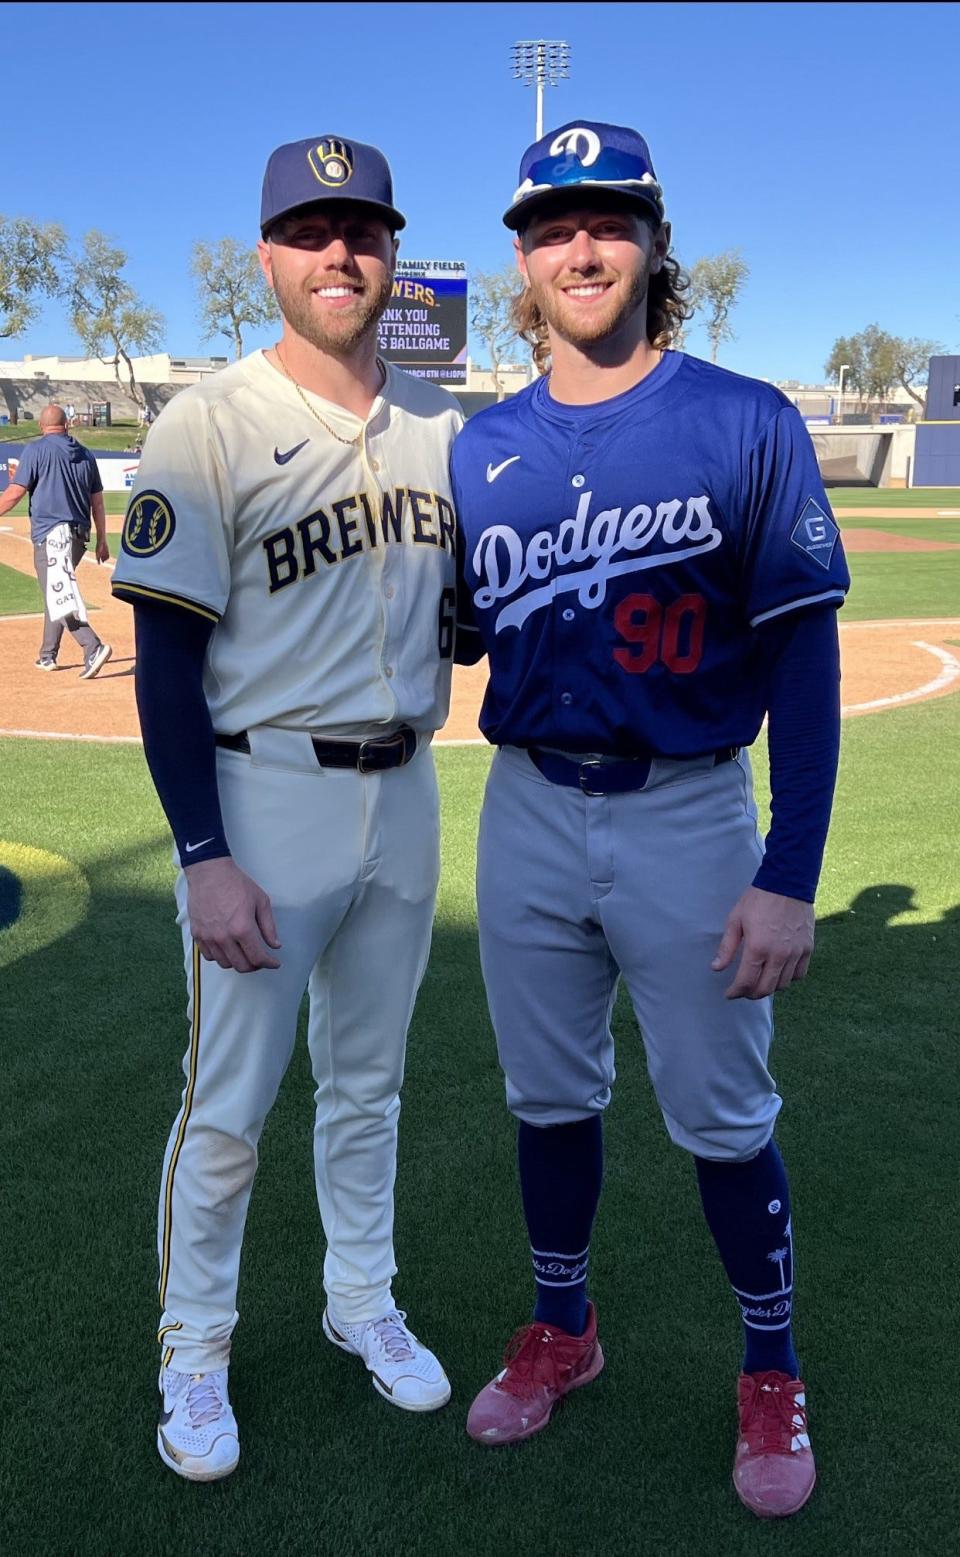 Brothers Owen Miller of the Brewers, and Noah Miller of the Dodgers, pose for a photo during Milwaukee's 11-3 loss to Los Angeles in a spring training game at American Family Fields in Phoenix on Saturday.